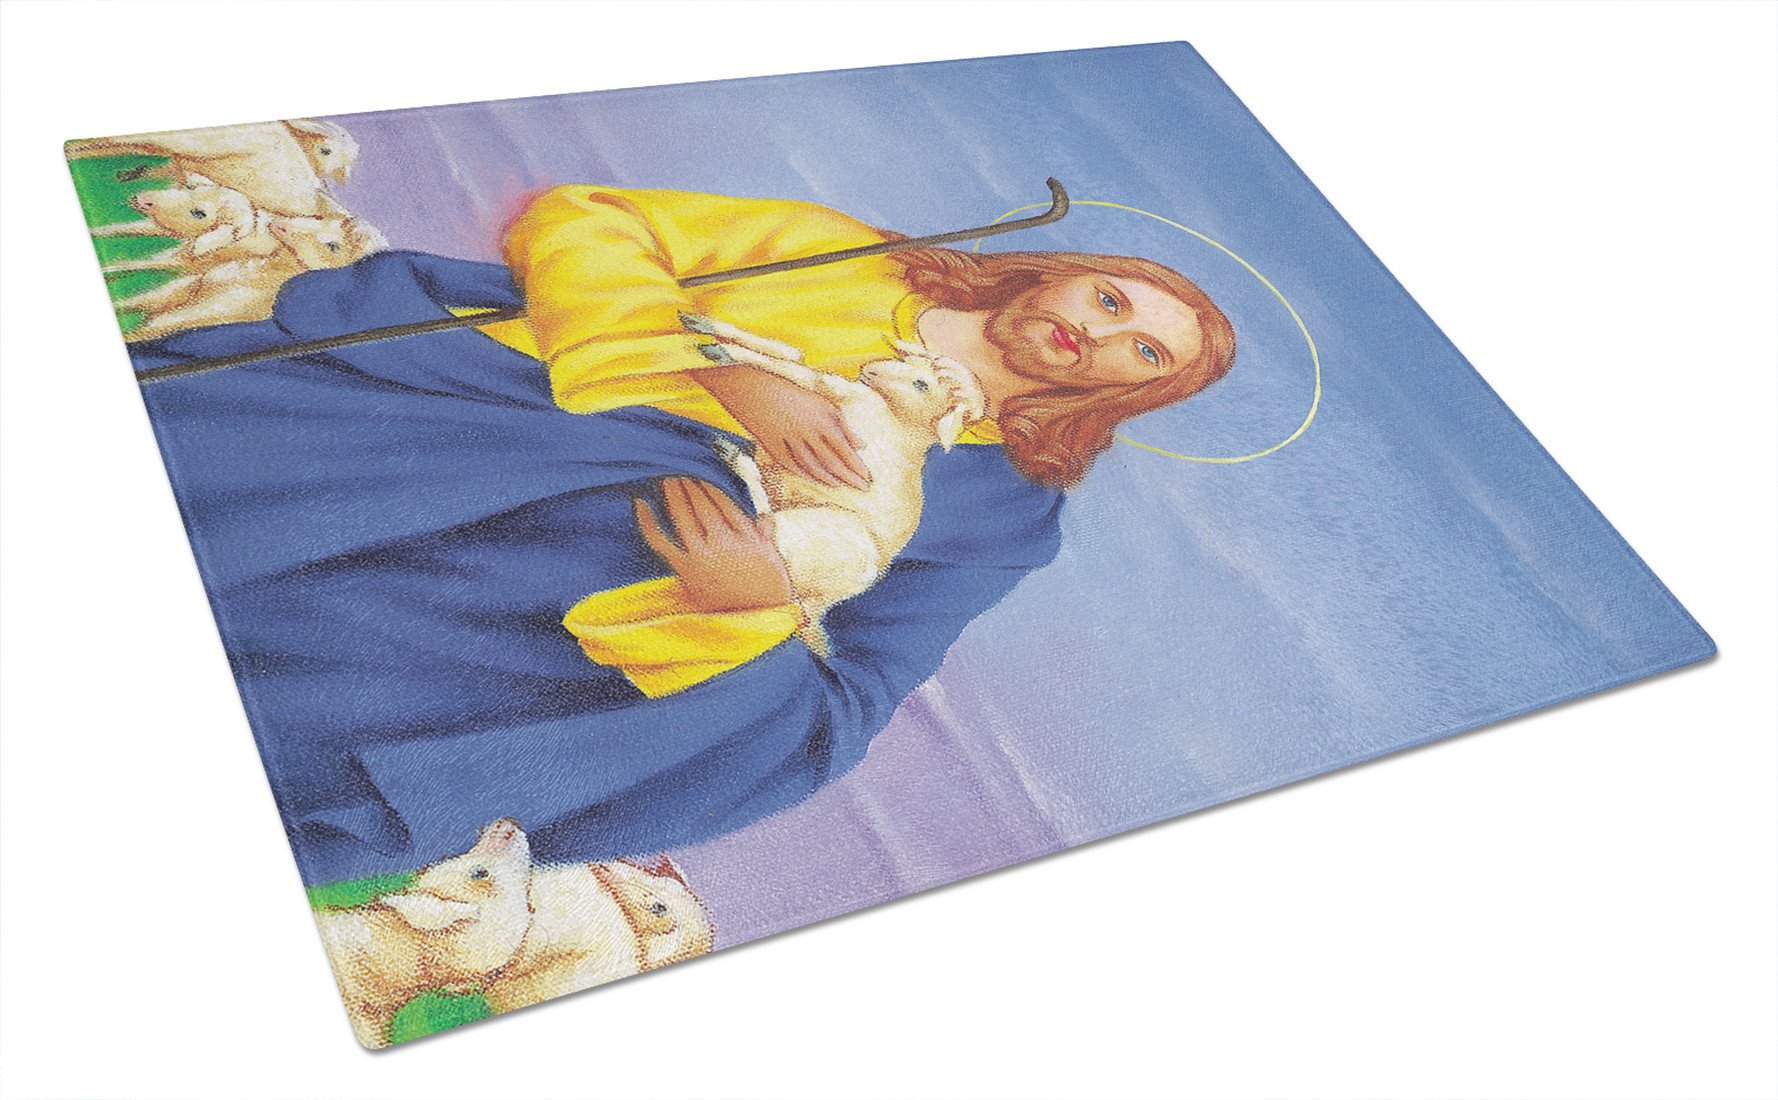 Jesus The Good Shepherd holding a lamb Glass Cutting Board Large AAH8215LCB by Caroline's Treasures